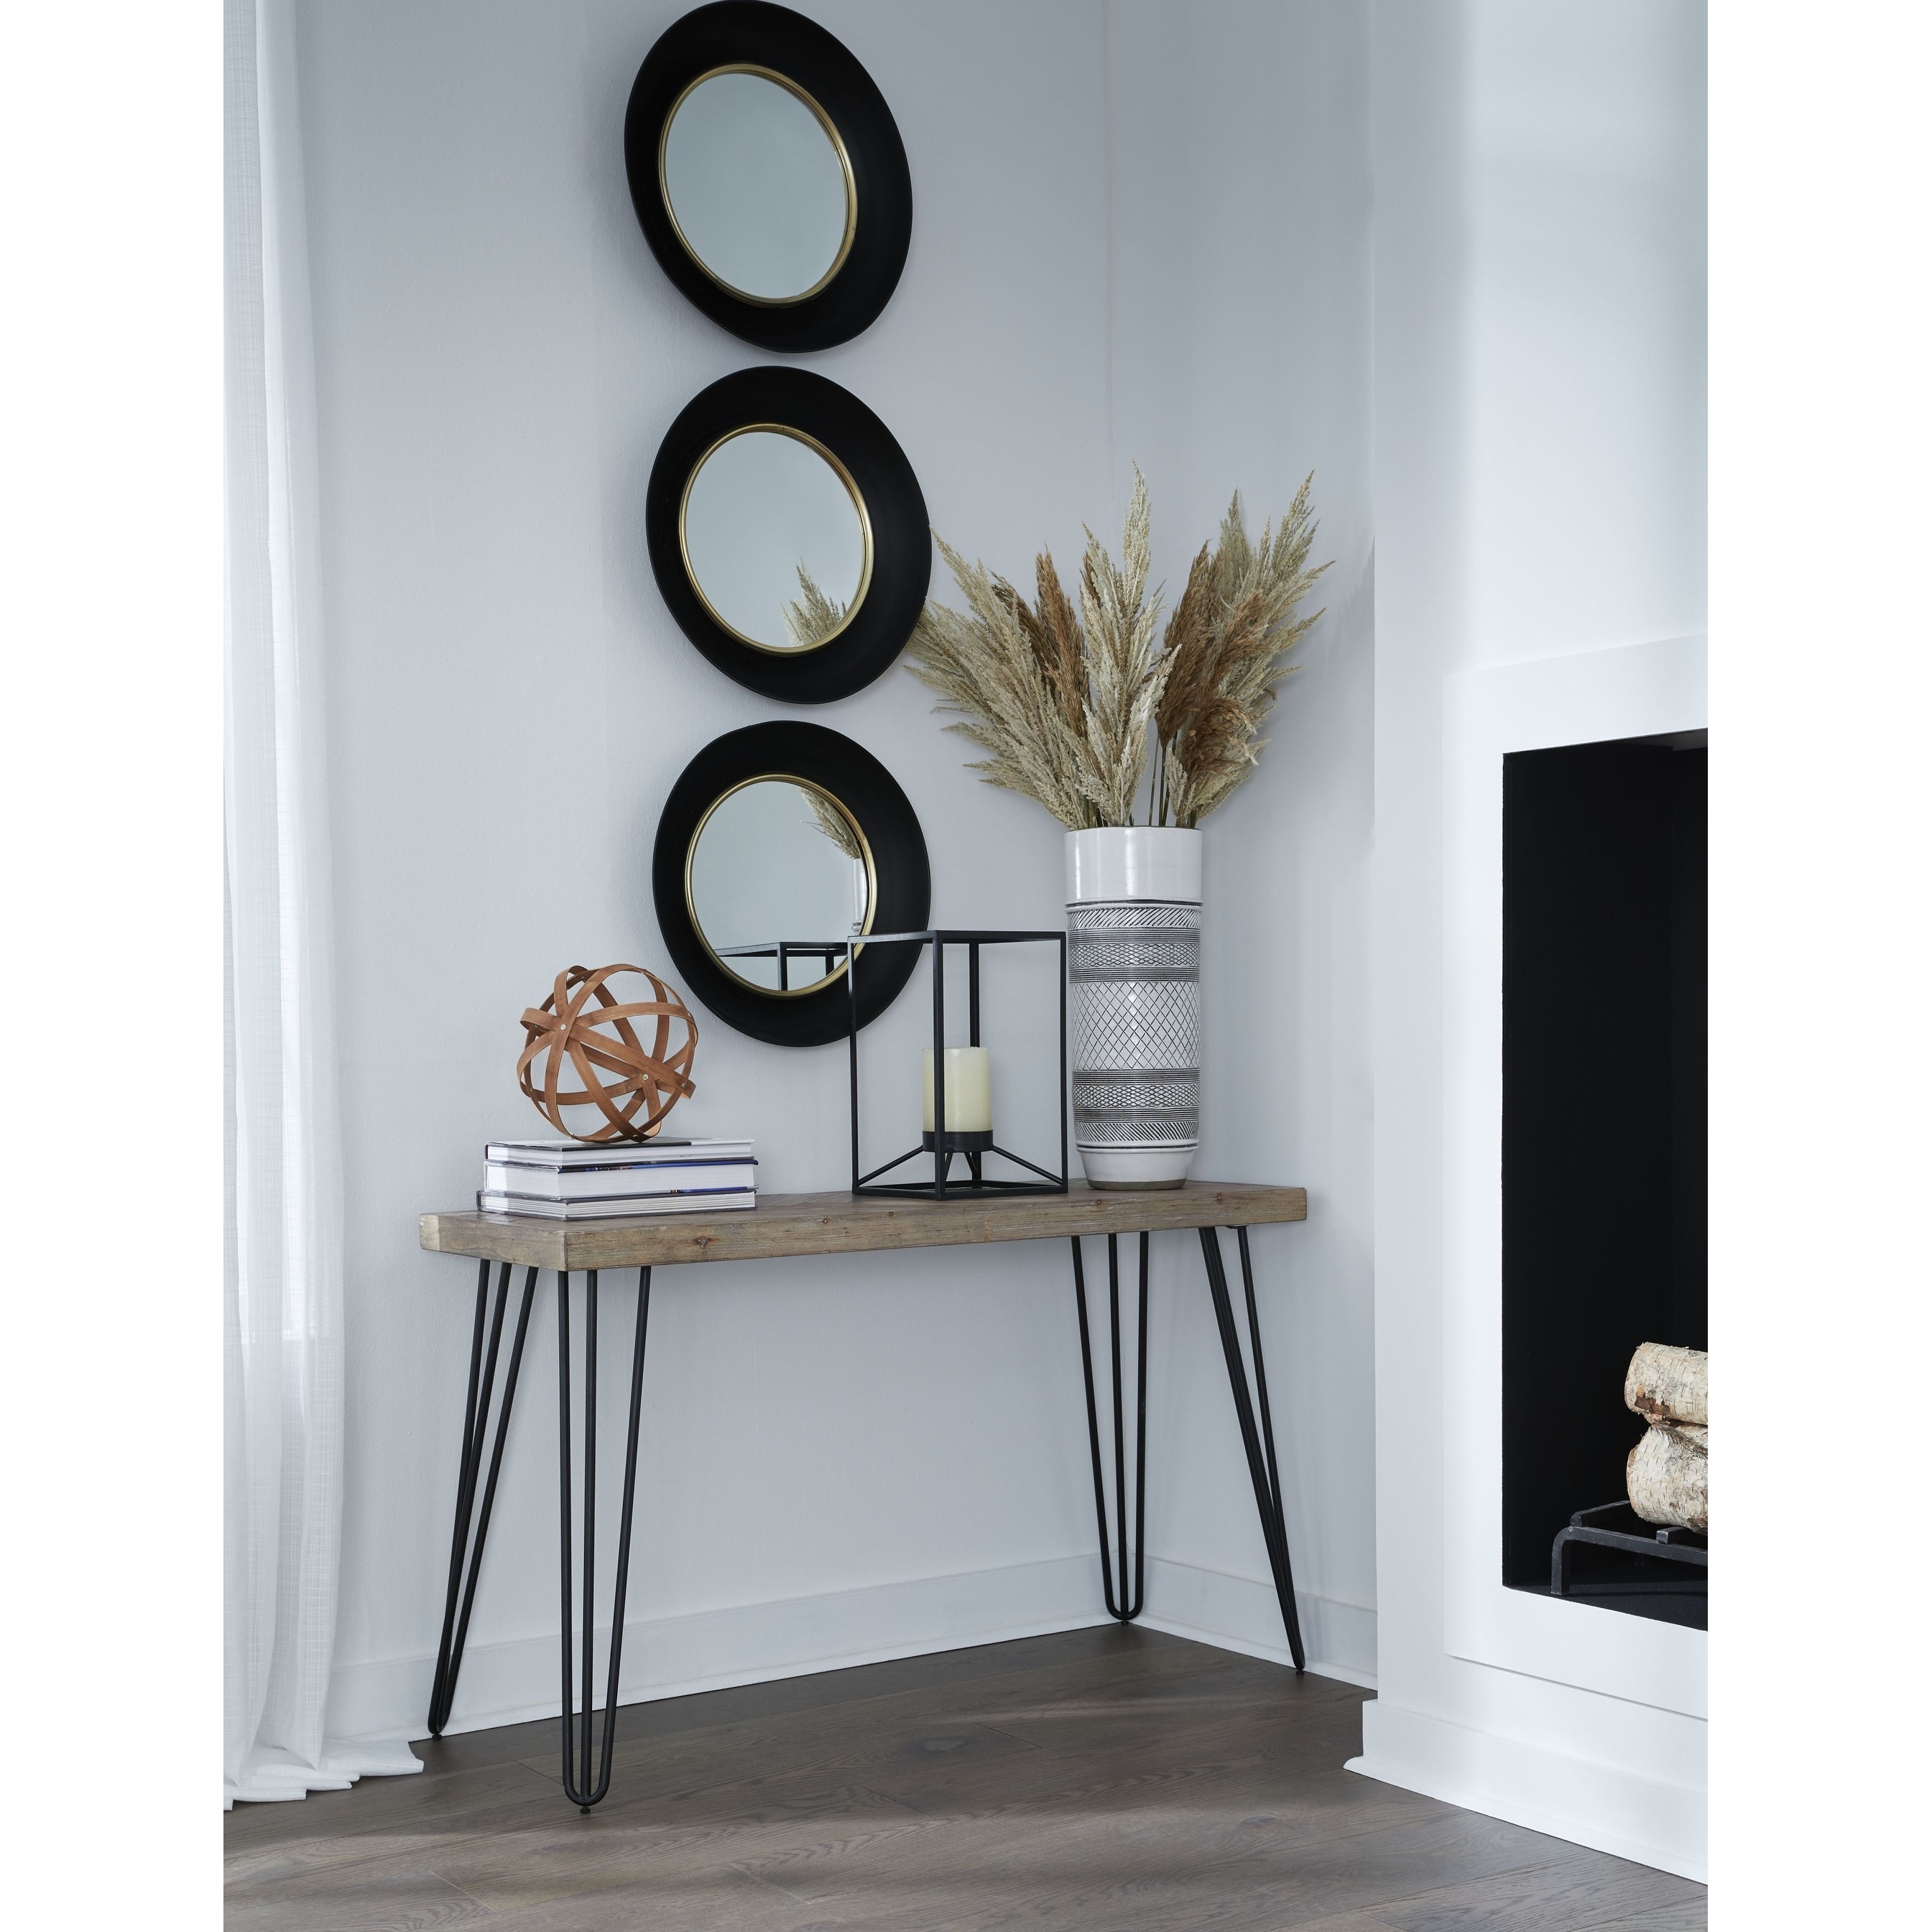 Everson Solid Fir Console Table in Sand Dollar - 29 x 41.8 x 18 - Bed  Bath & Beyond - 34489553